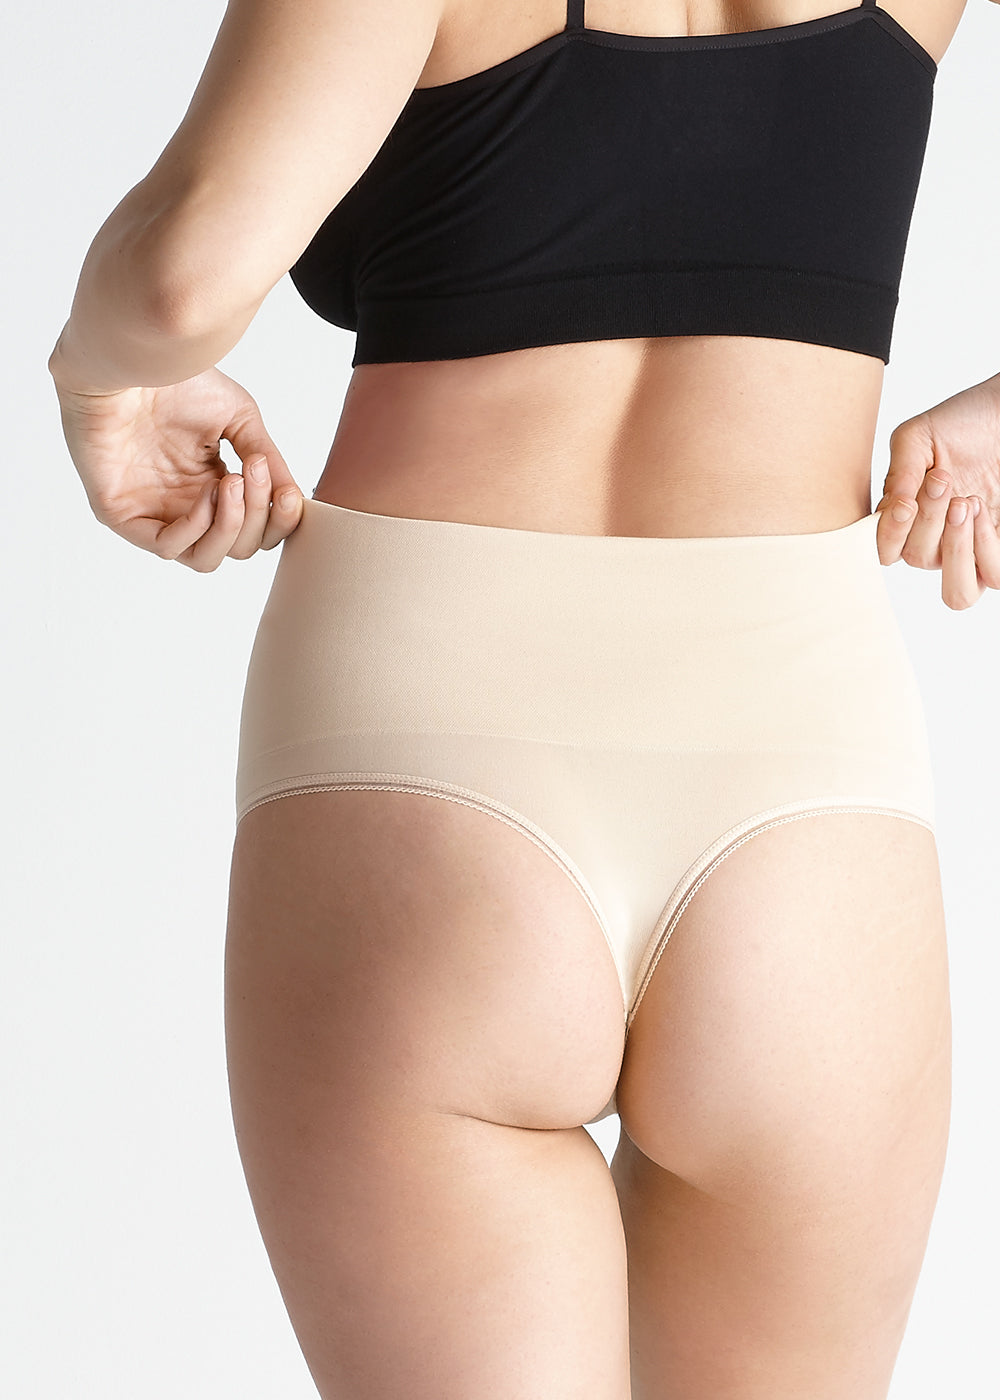 What Is The Best Shapewear To Hide My Love Handles? – The Magic Knicker Shop